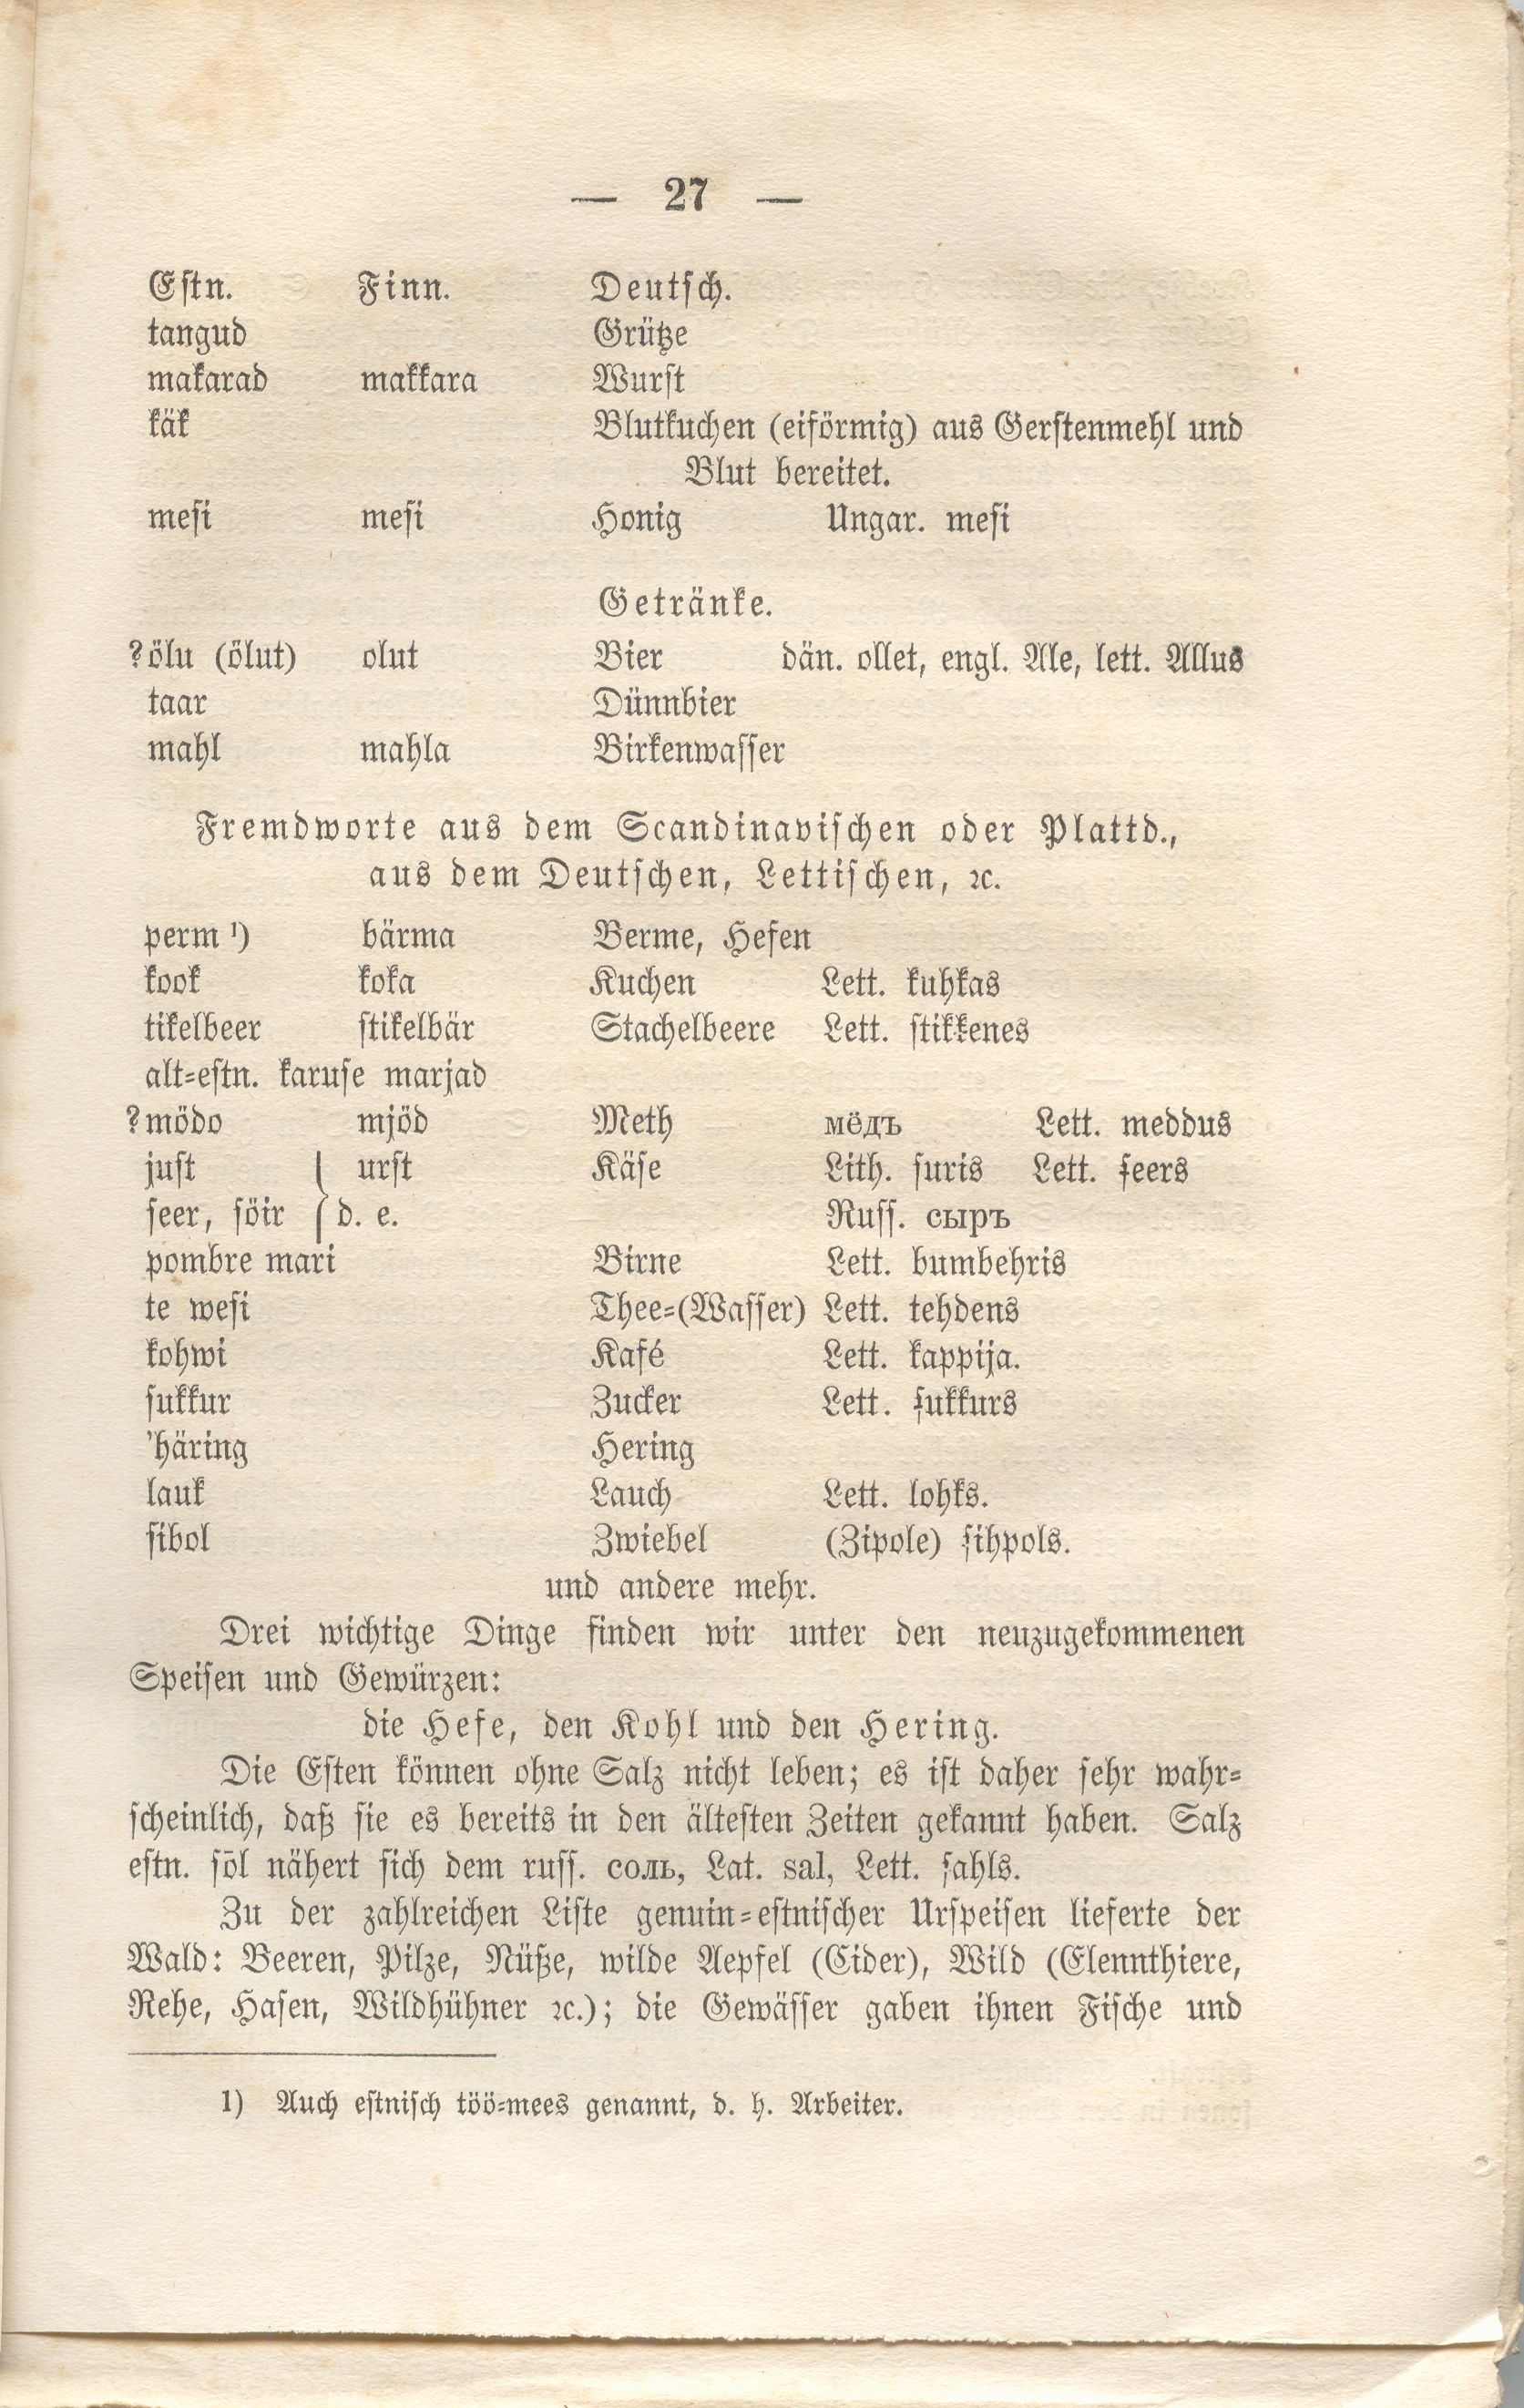 Wagien (1868) | 31. (27) Main body of text